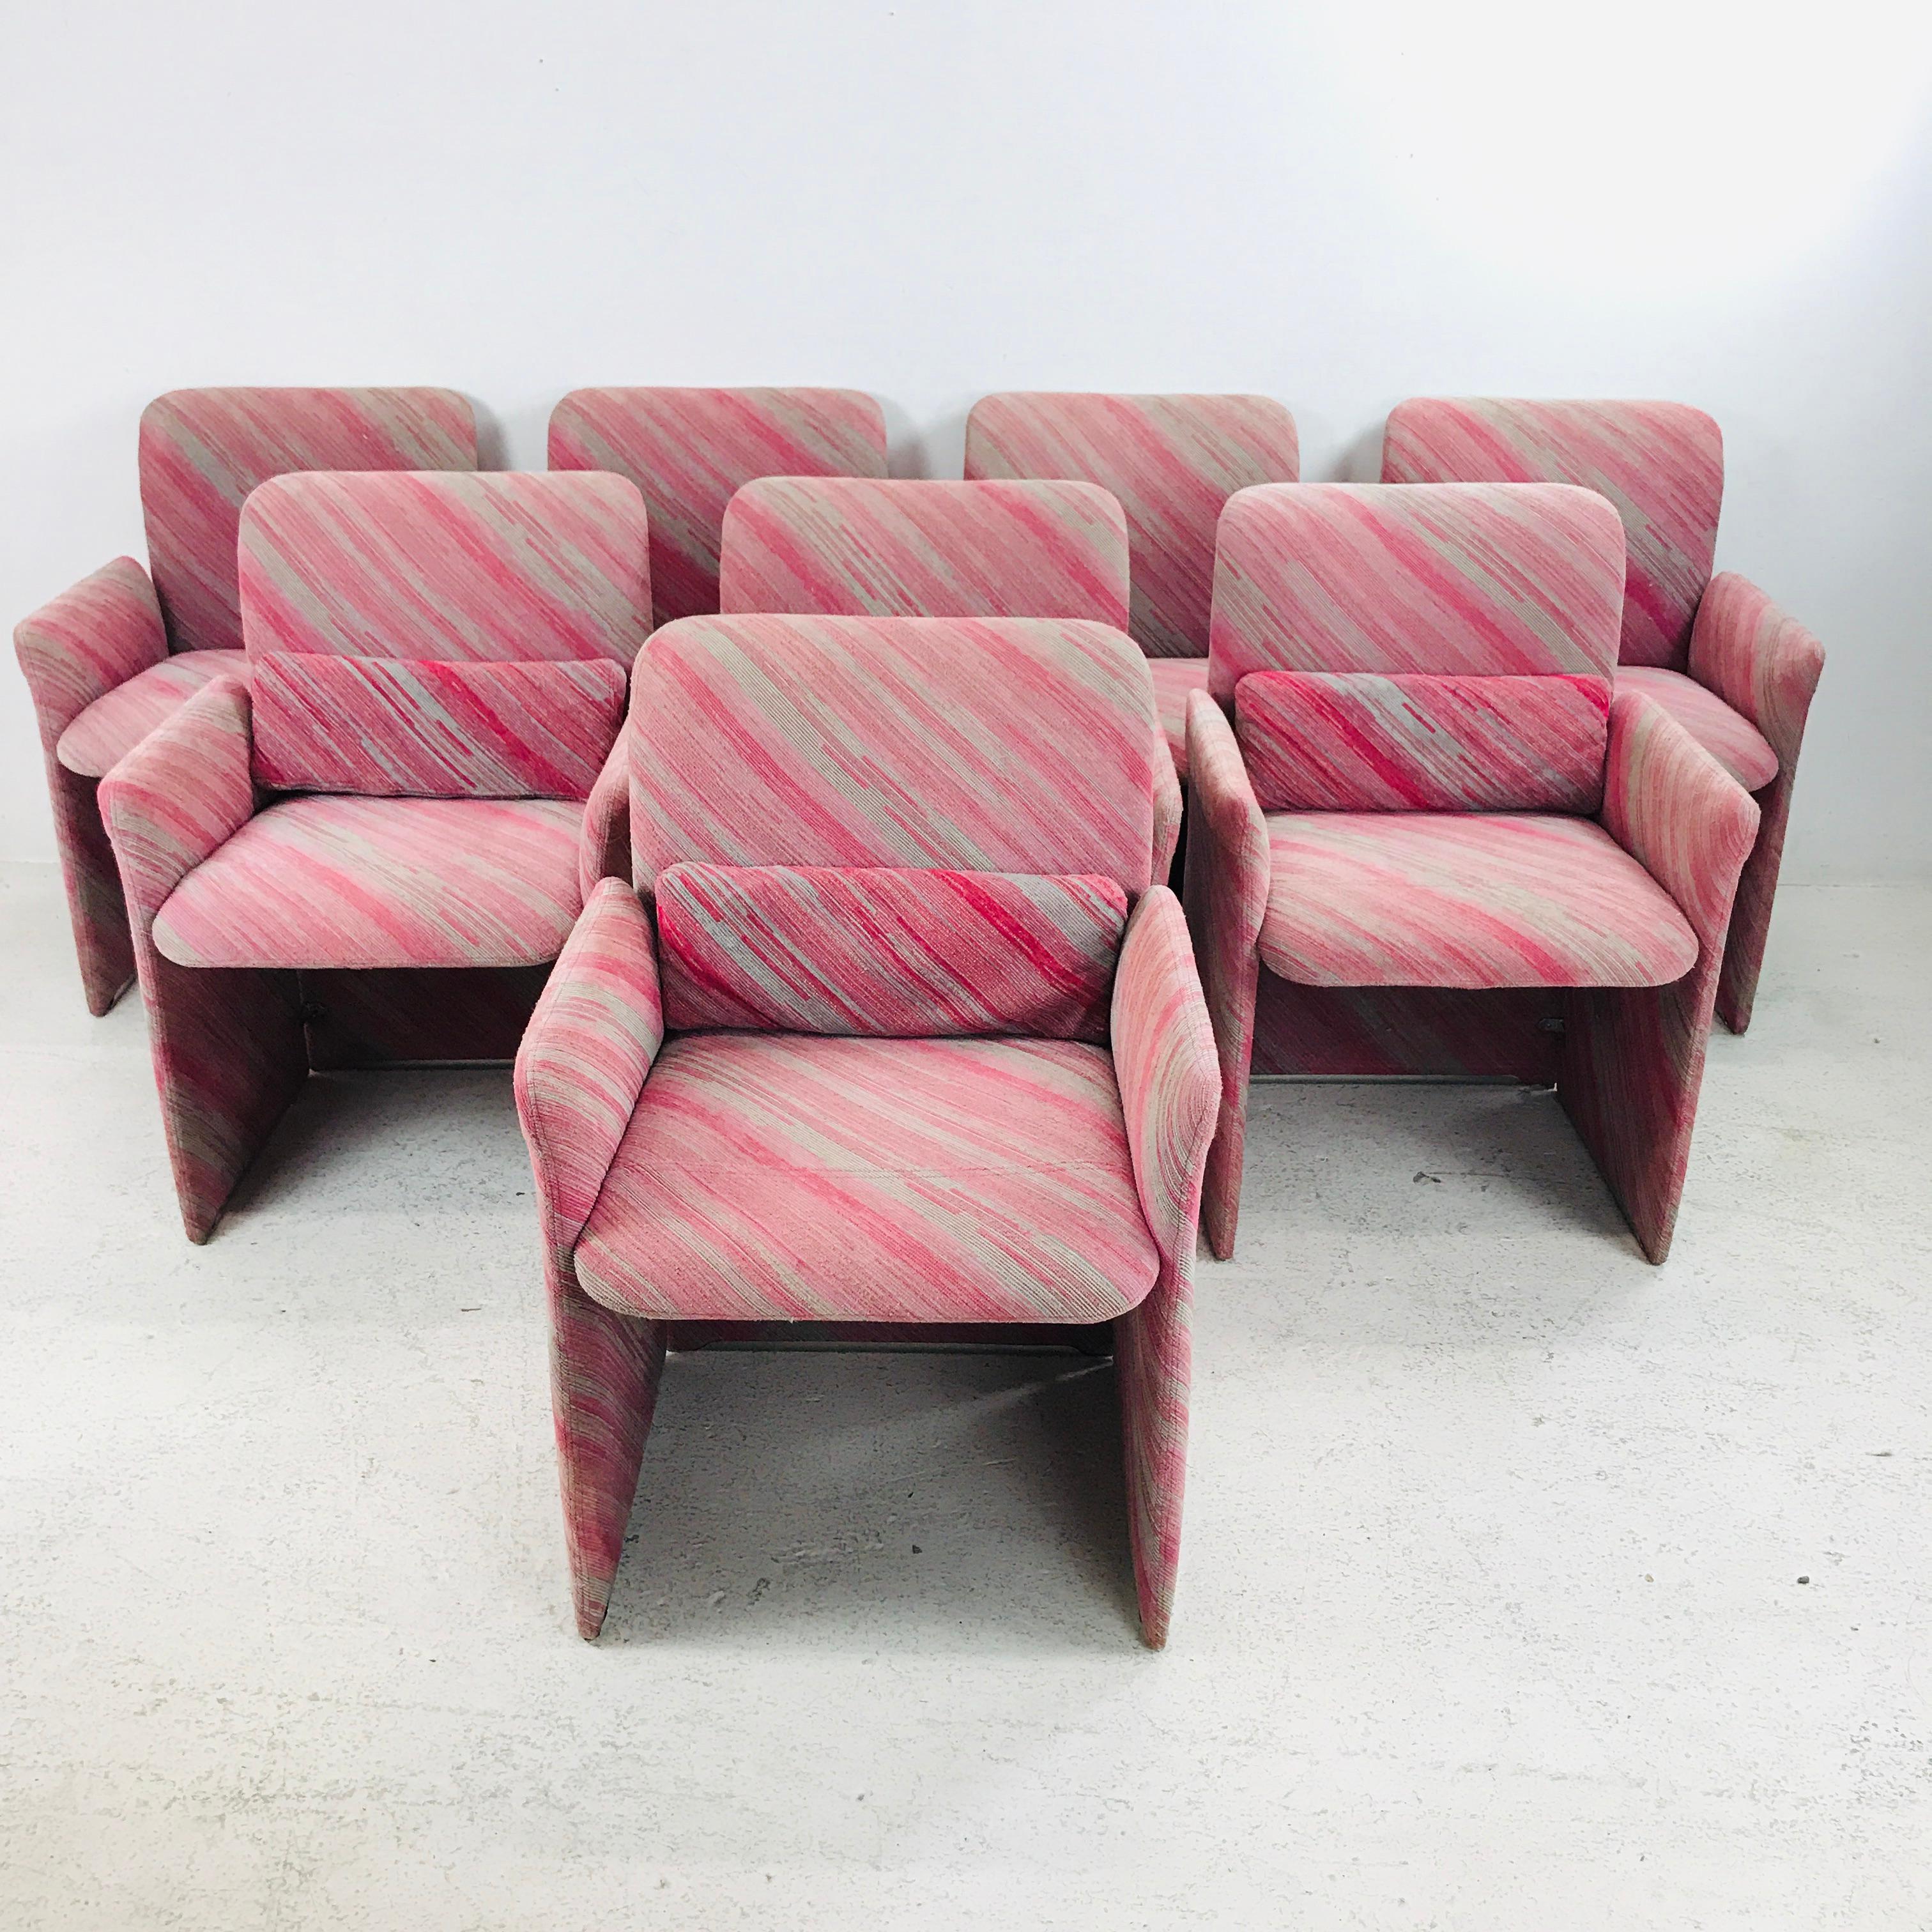 Stunning set of 10 1980s Saporiti dining chairs in Missoni fabric upholstery.